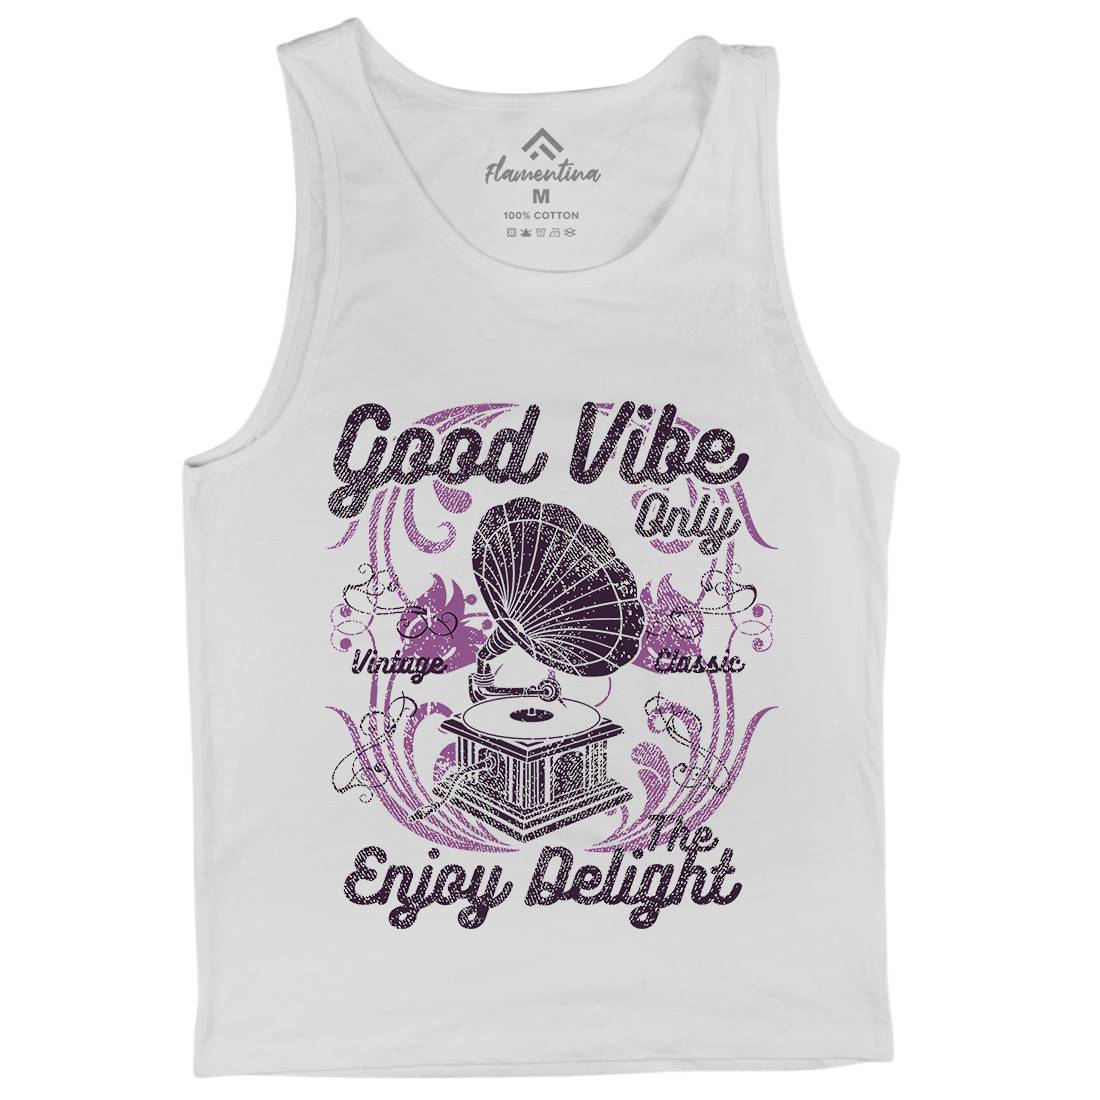 Good Vibe Only Mens Tank Top Vest Music A059